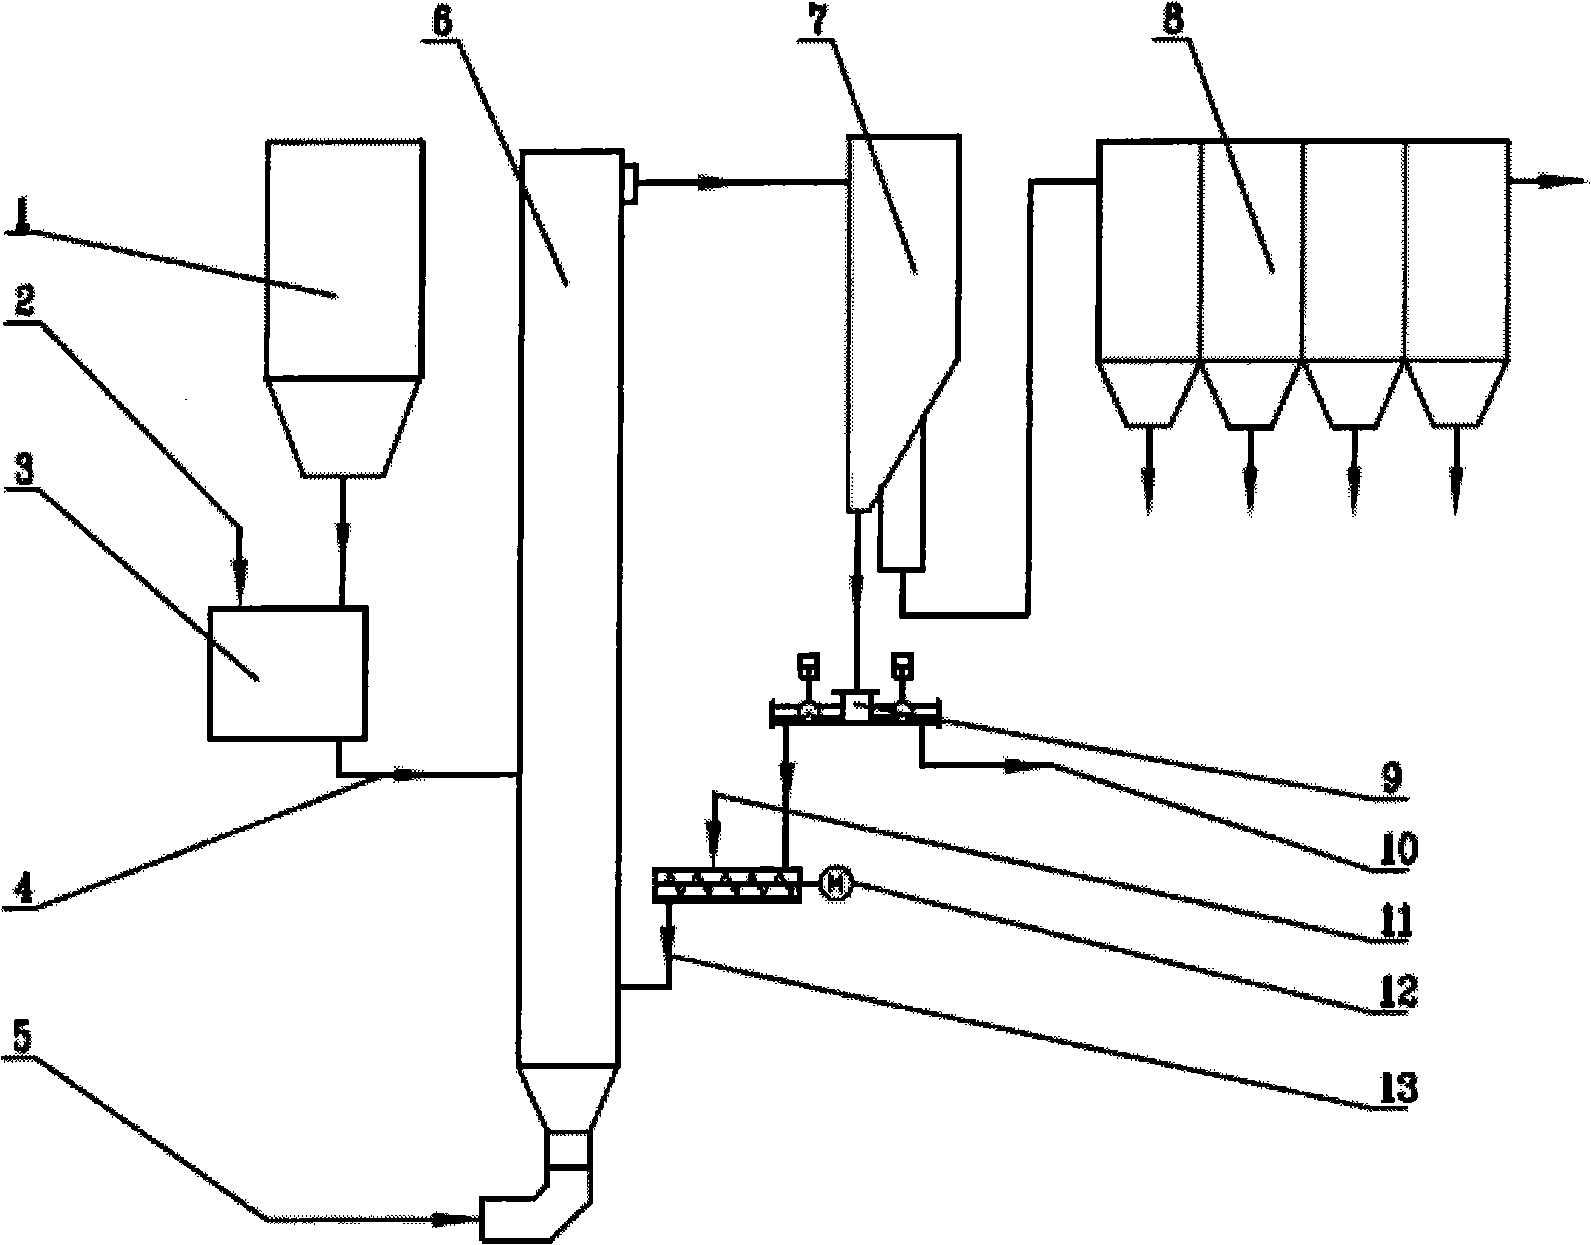 Circulating fluid bed flue gas desulfurization technique and device